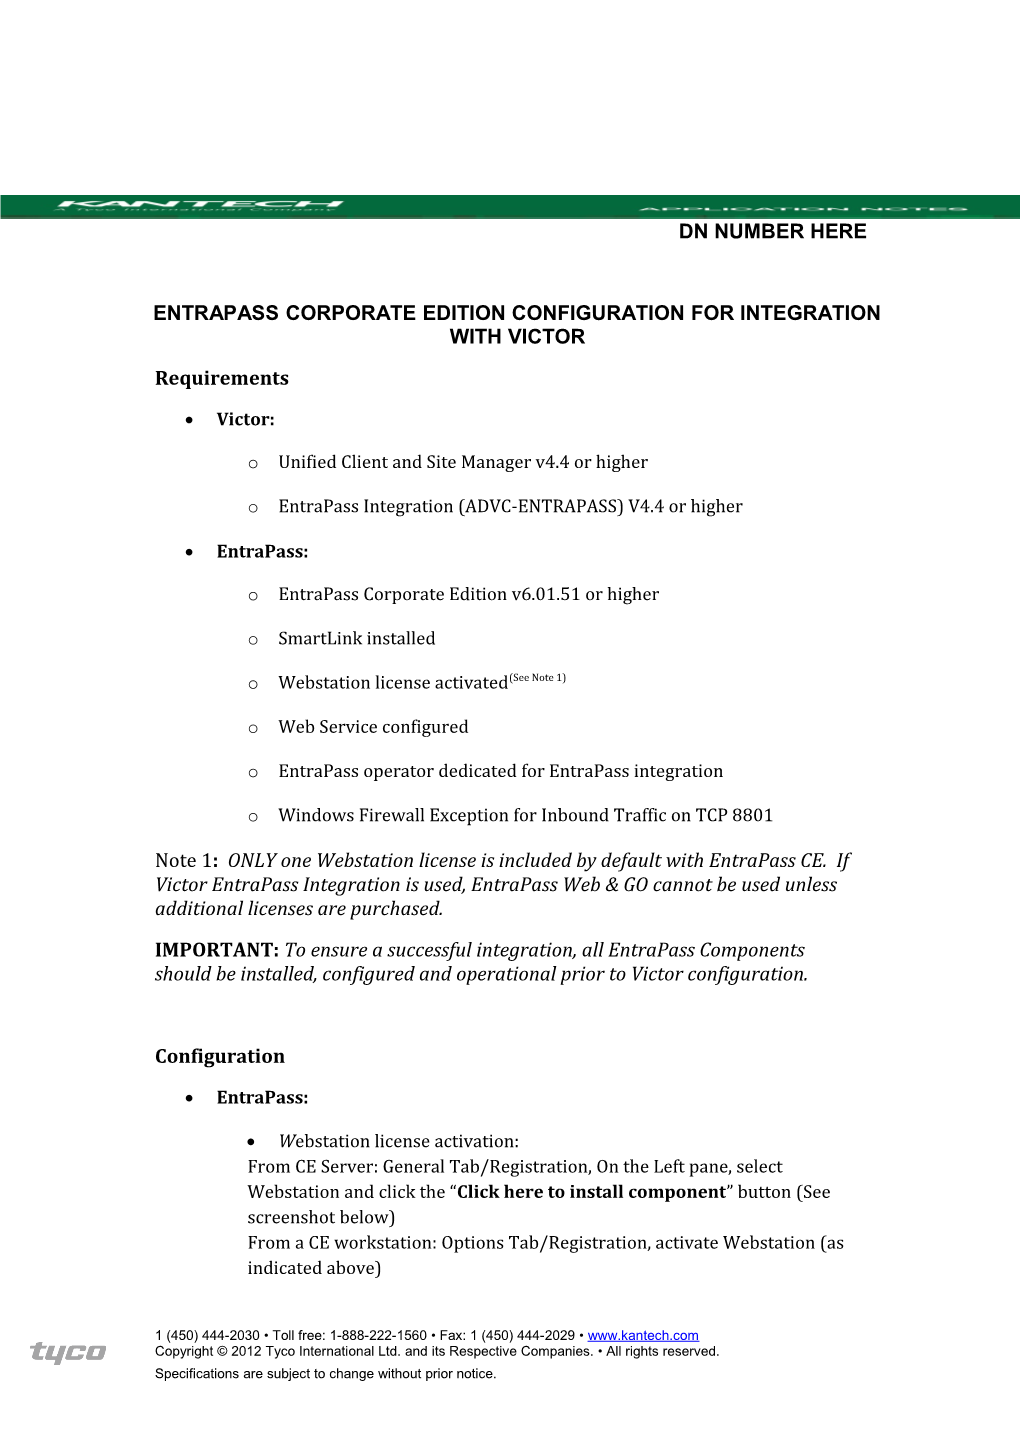 Entrapass Corporate Edition Configuration for Integration with Victor